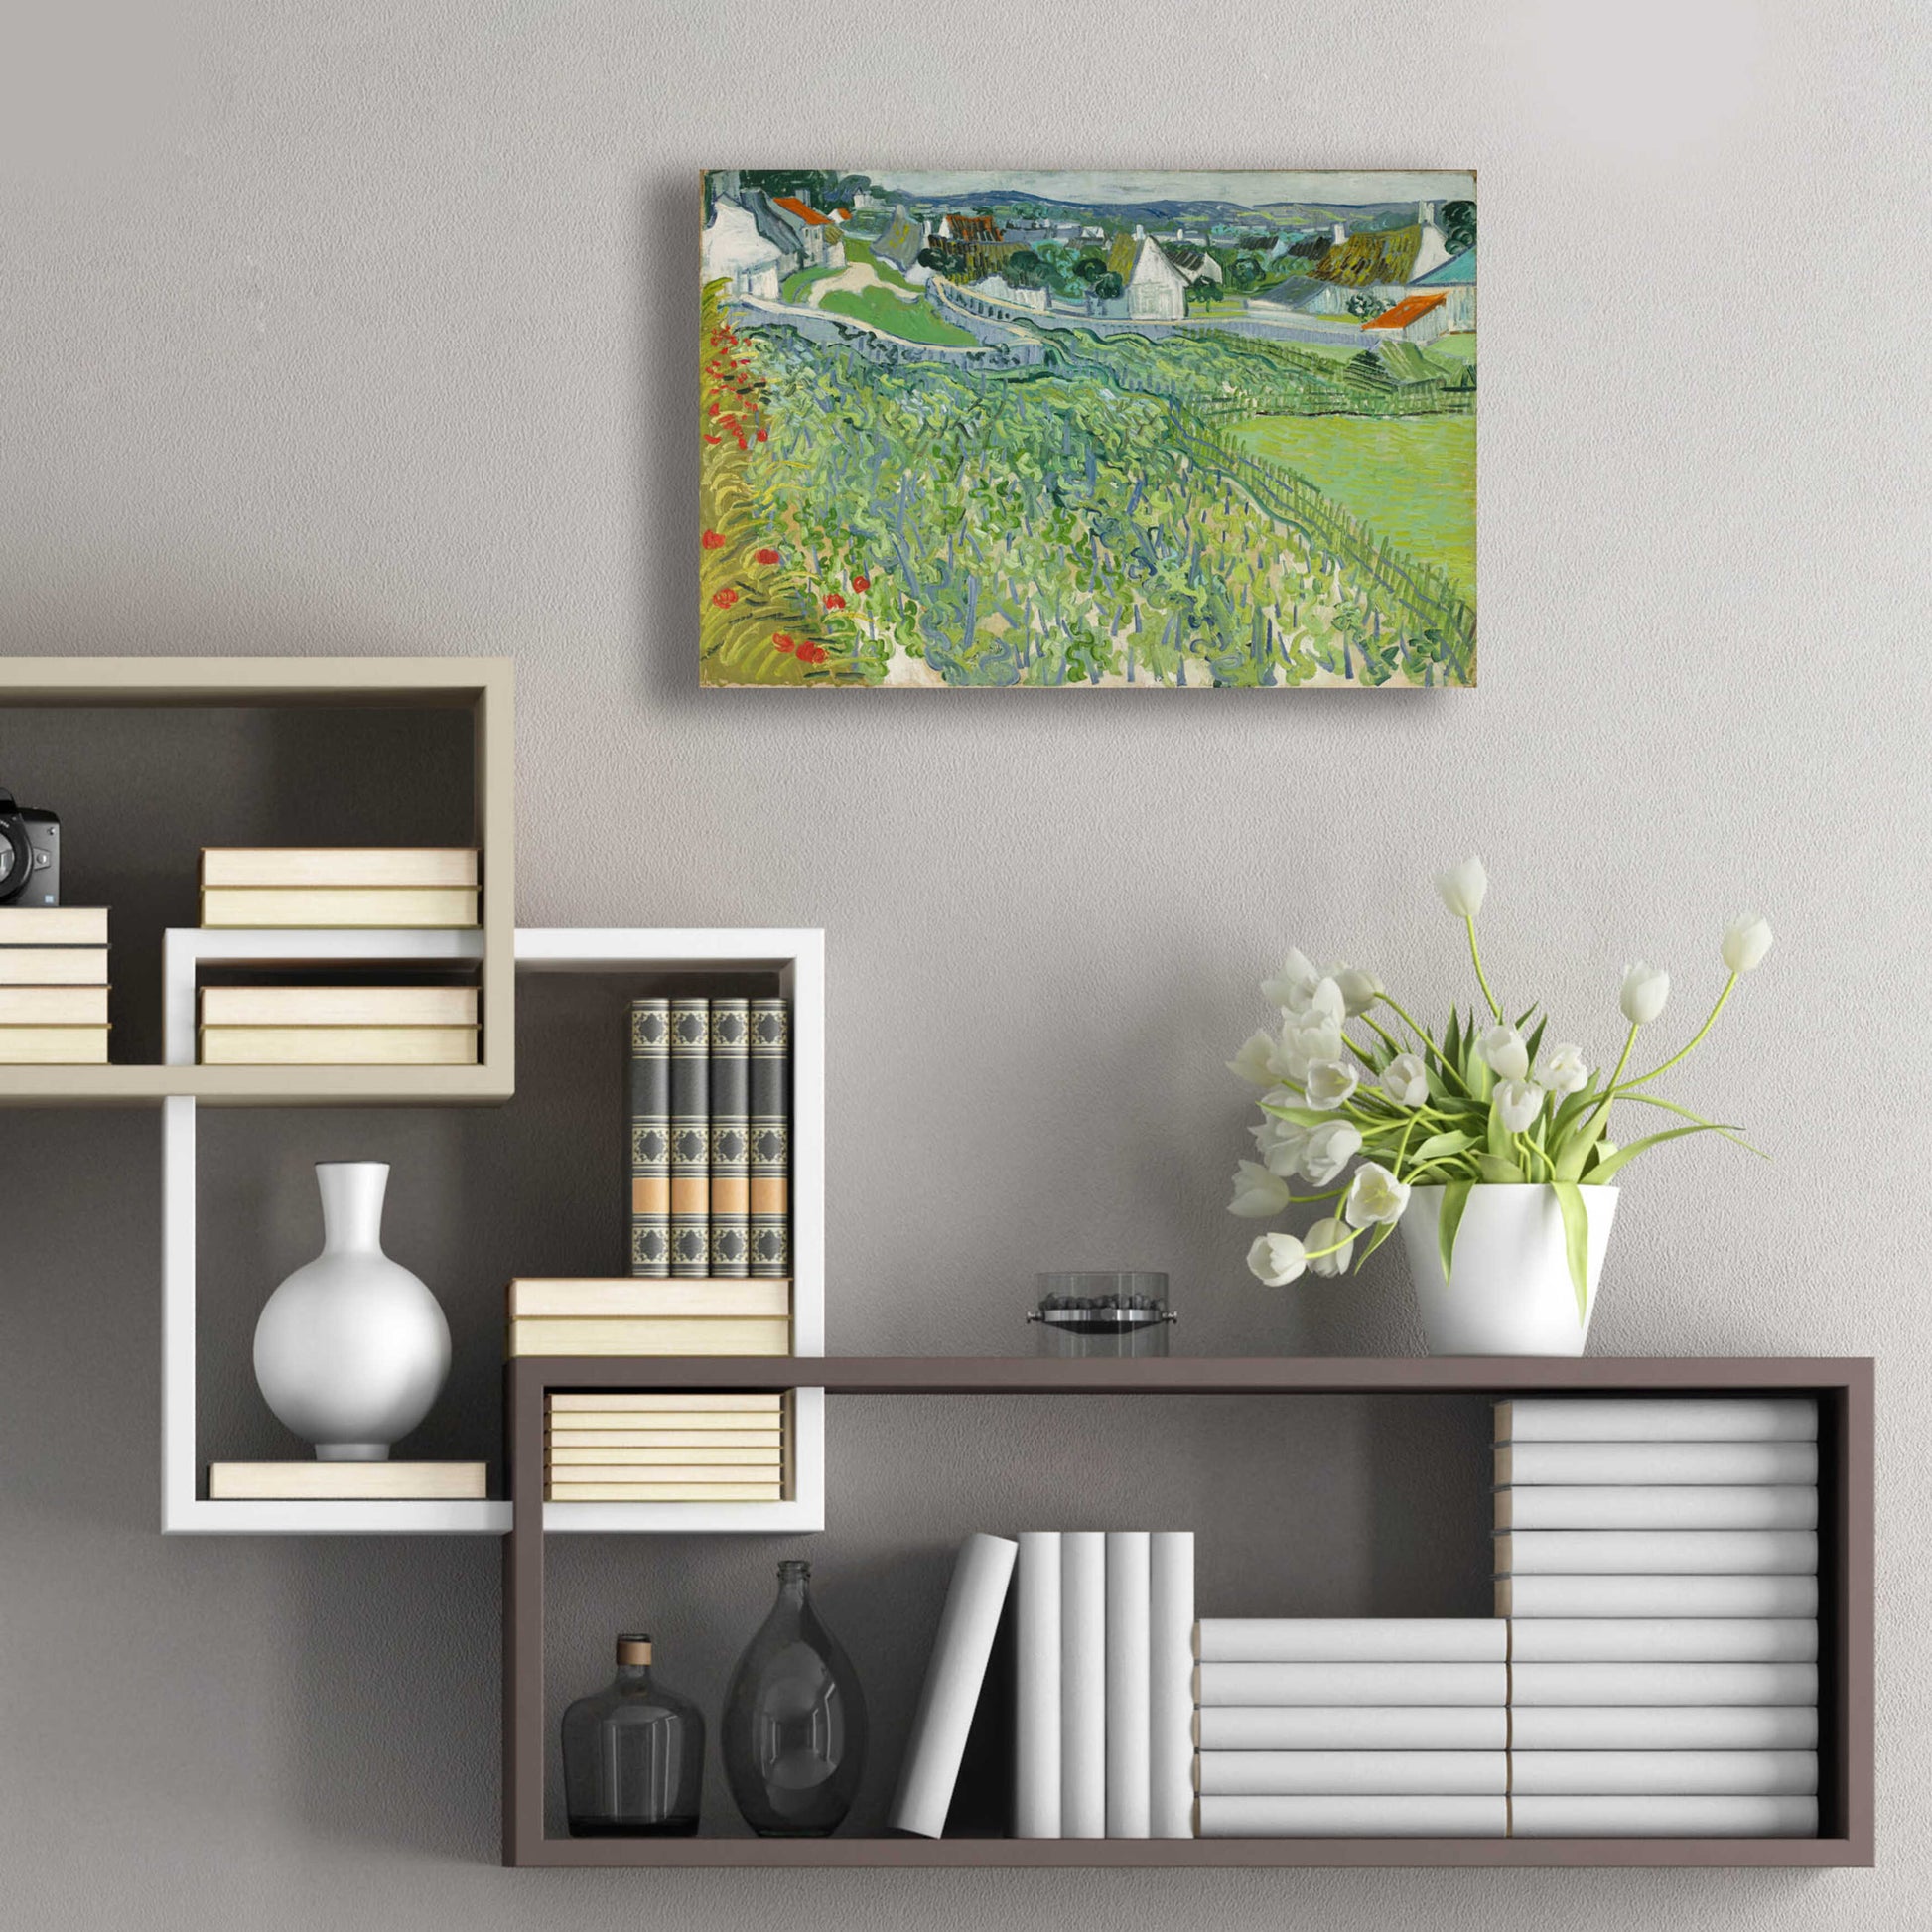 Epic Art 'Vineyards At Auvers' by Vincent Van Gogh, Acrylic Glass Wall Art,24x16